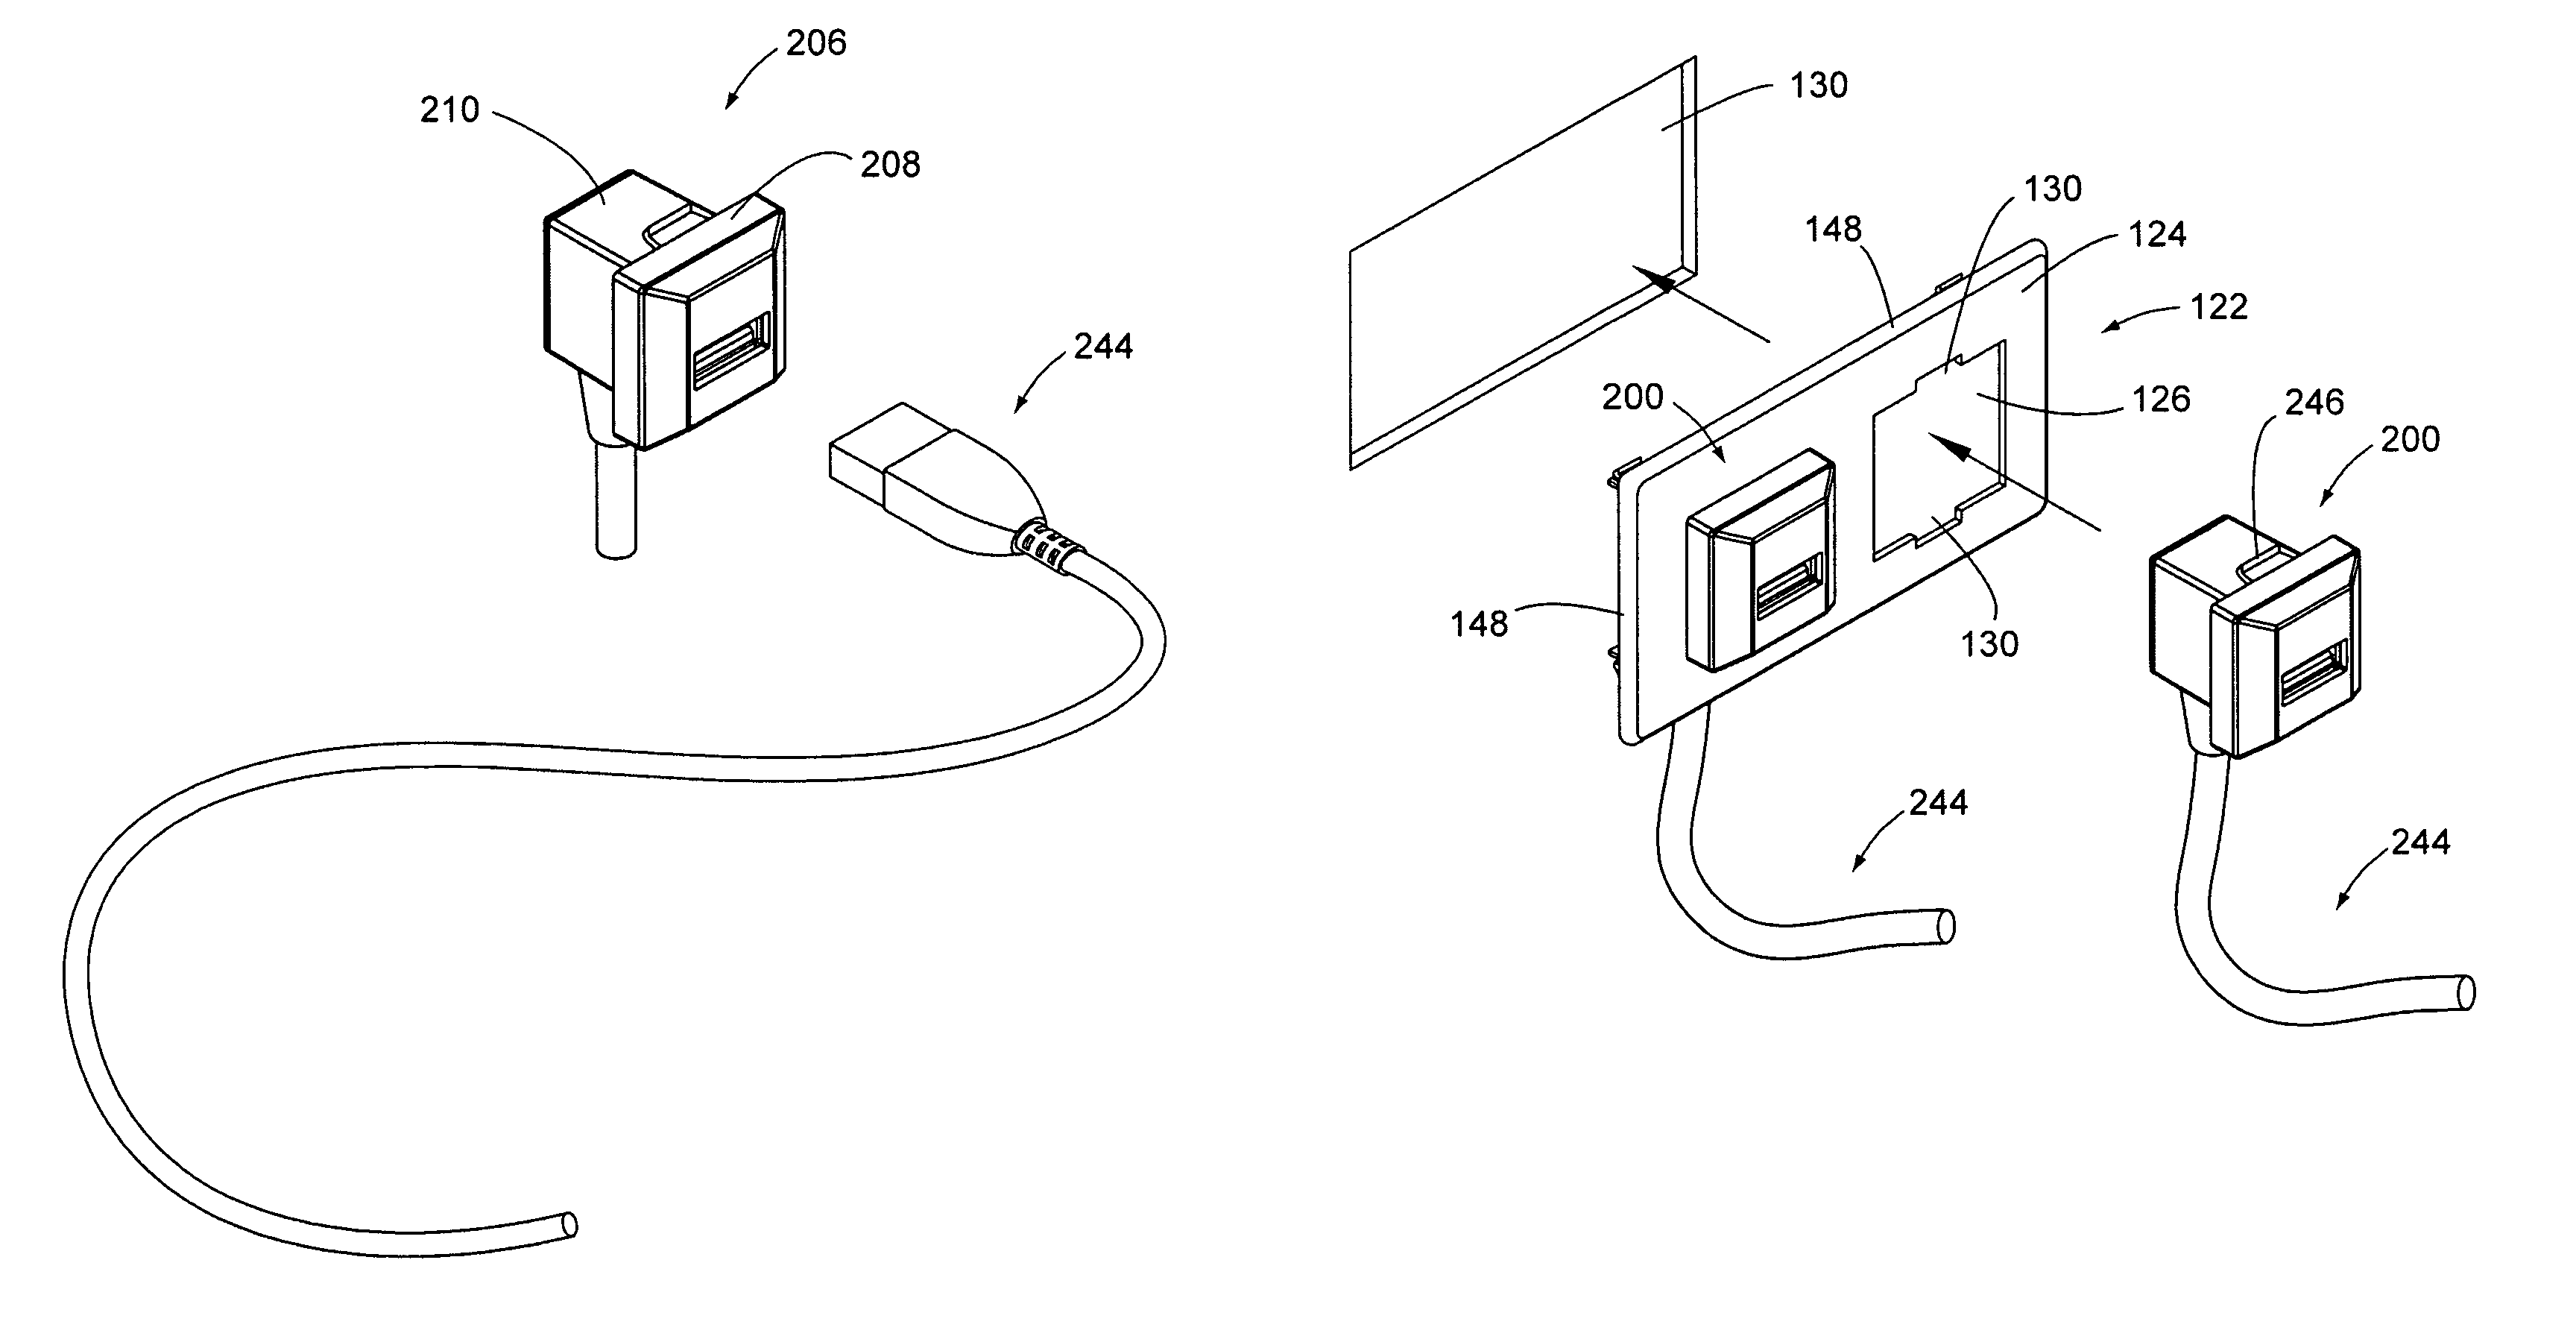 USB connection assembly